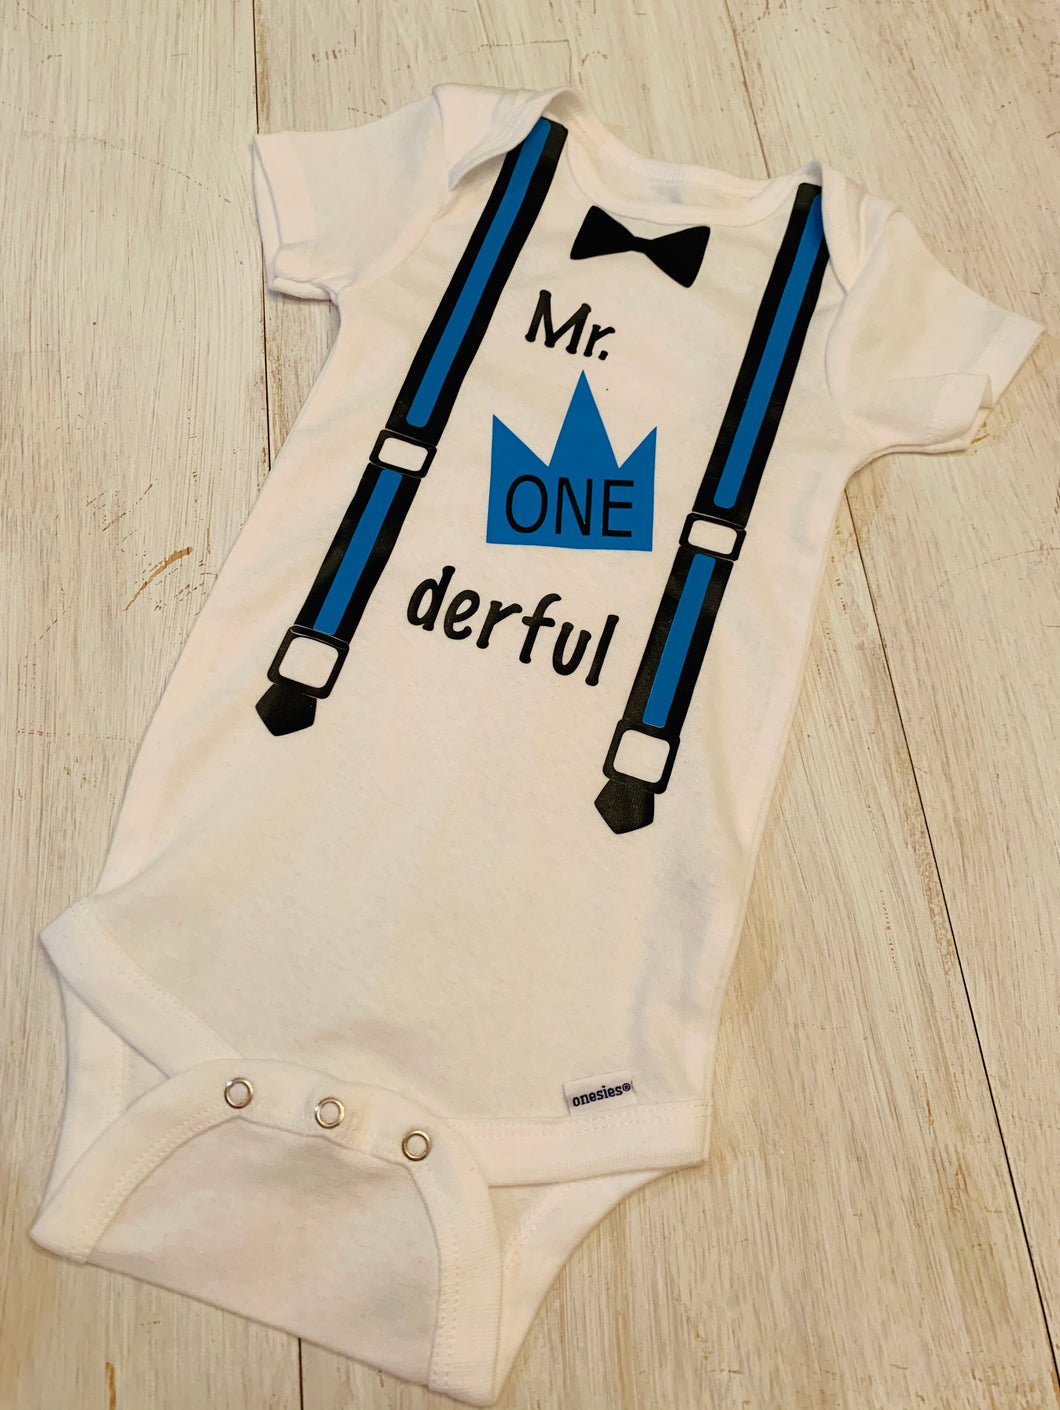 Mr. Onederful Baby Bodysuit | Birthday outfit